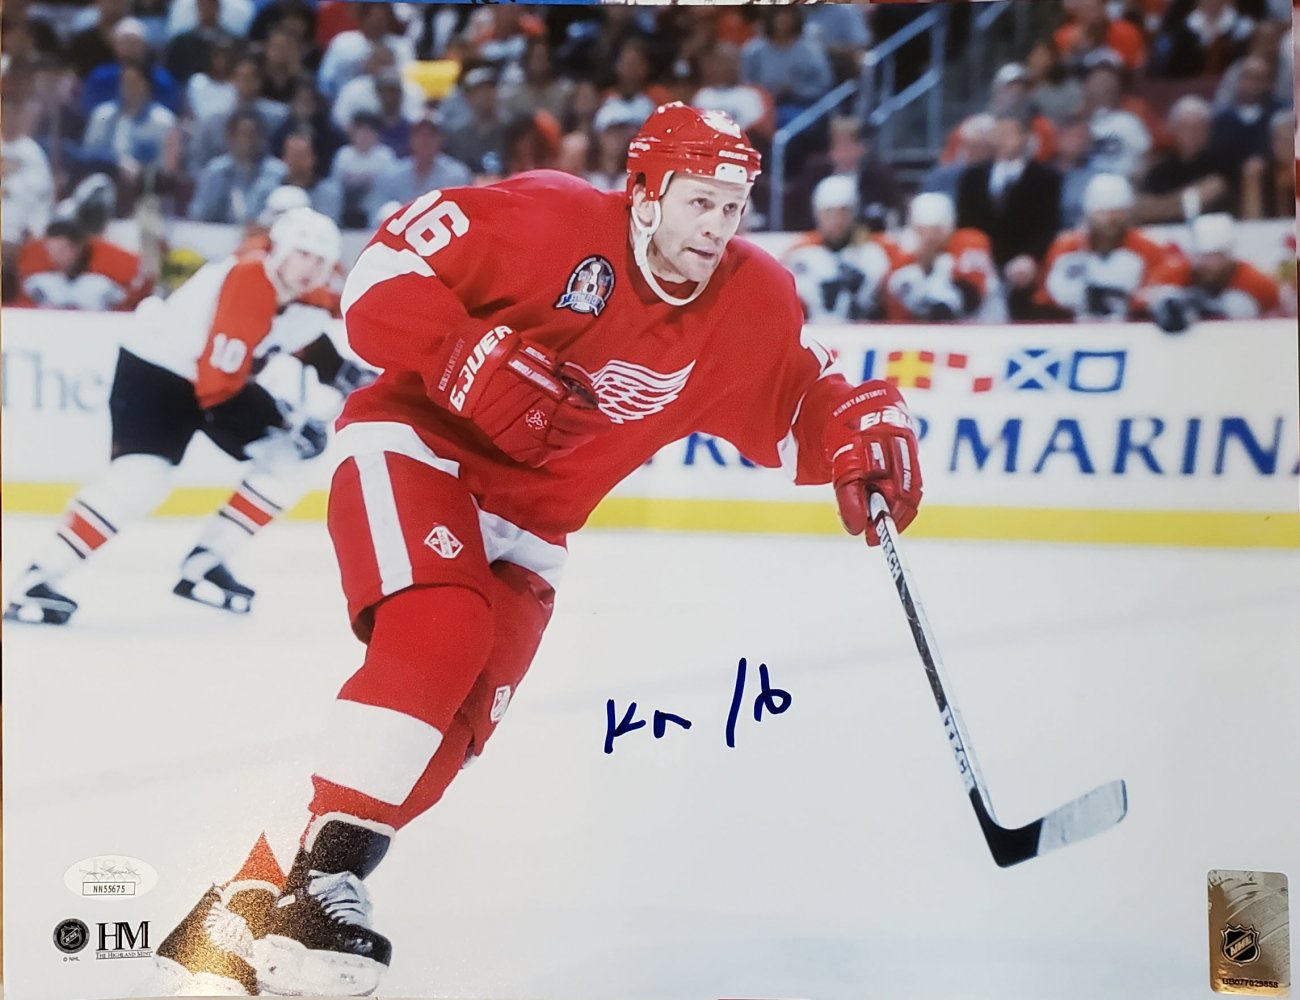 Our 2nd Vladimir Konstantinov benefit autograph signing has